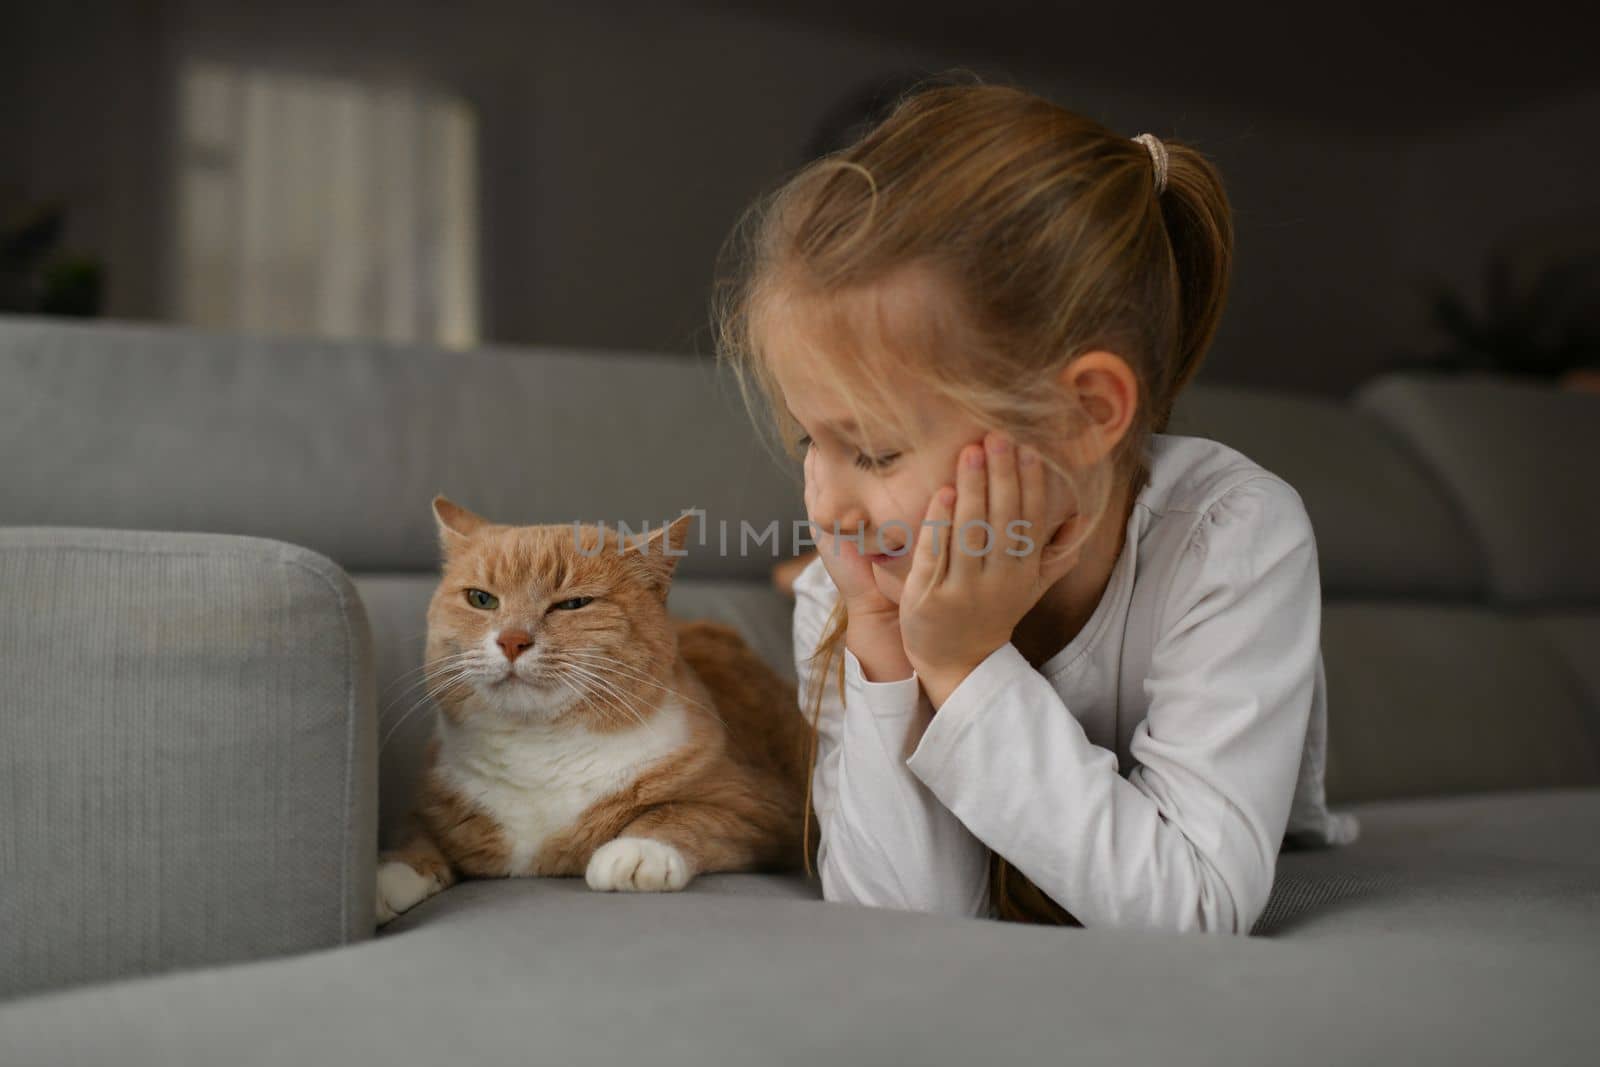 A girl near a ginger cat on the couch by Godi